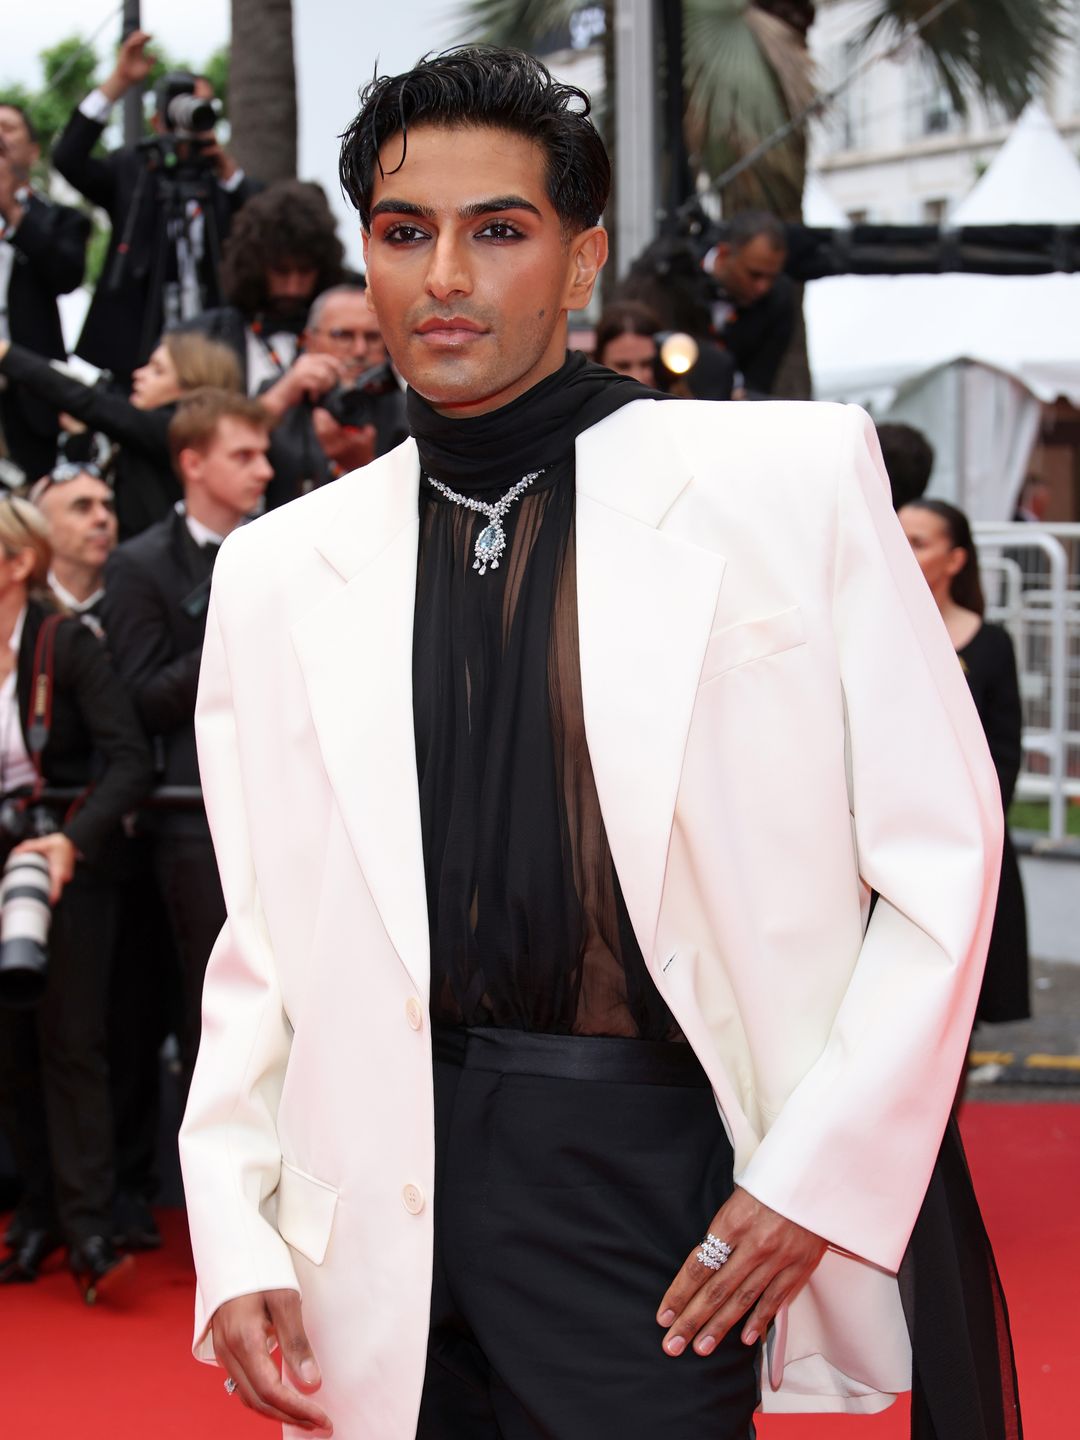 Rahi Chadda in a white suit jacket and sheer top